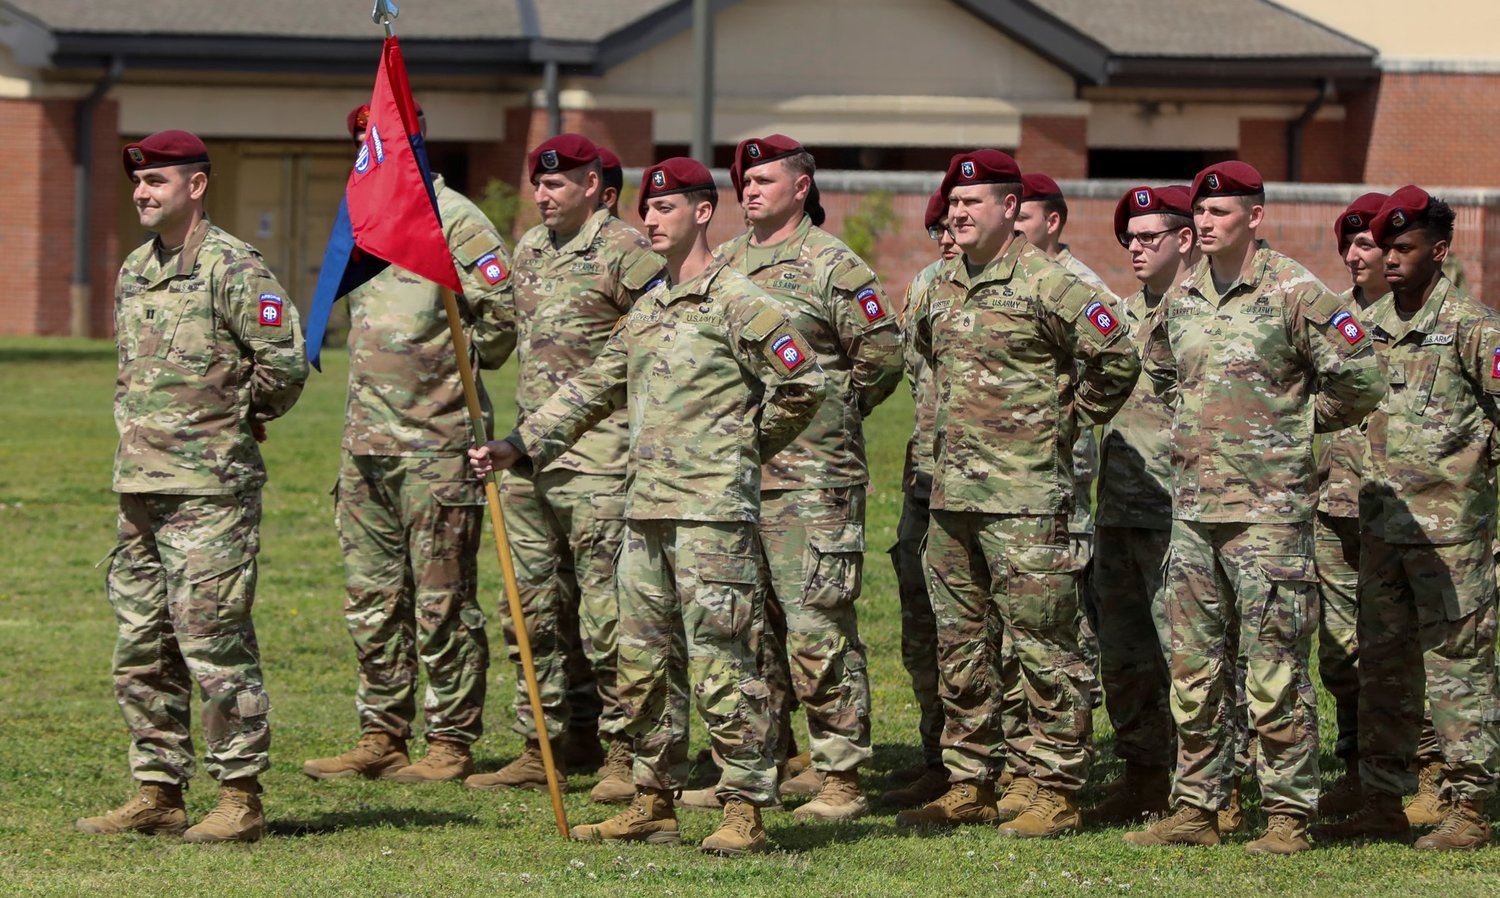 Paratroopers of Gainey Company, Headquarters and Headquarters Battalion, 82nd Airborne Division, stand in formation during the uncasing ceremony of Gainey Company on Fort Brag on March 29, 2023. The uncasing ceremony will allow for the company to unveil its guidon and formally begin operations.